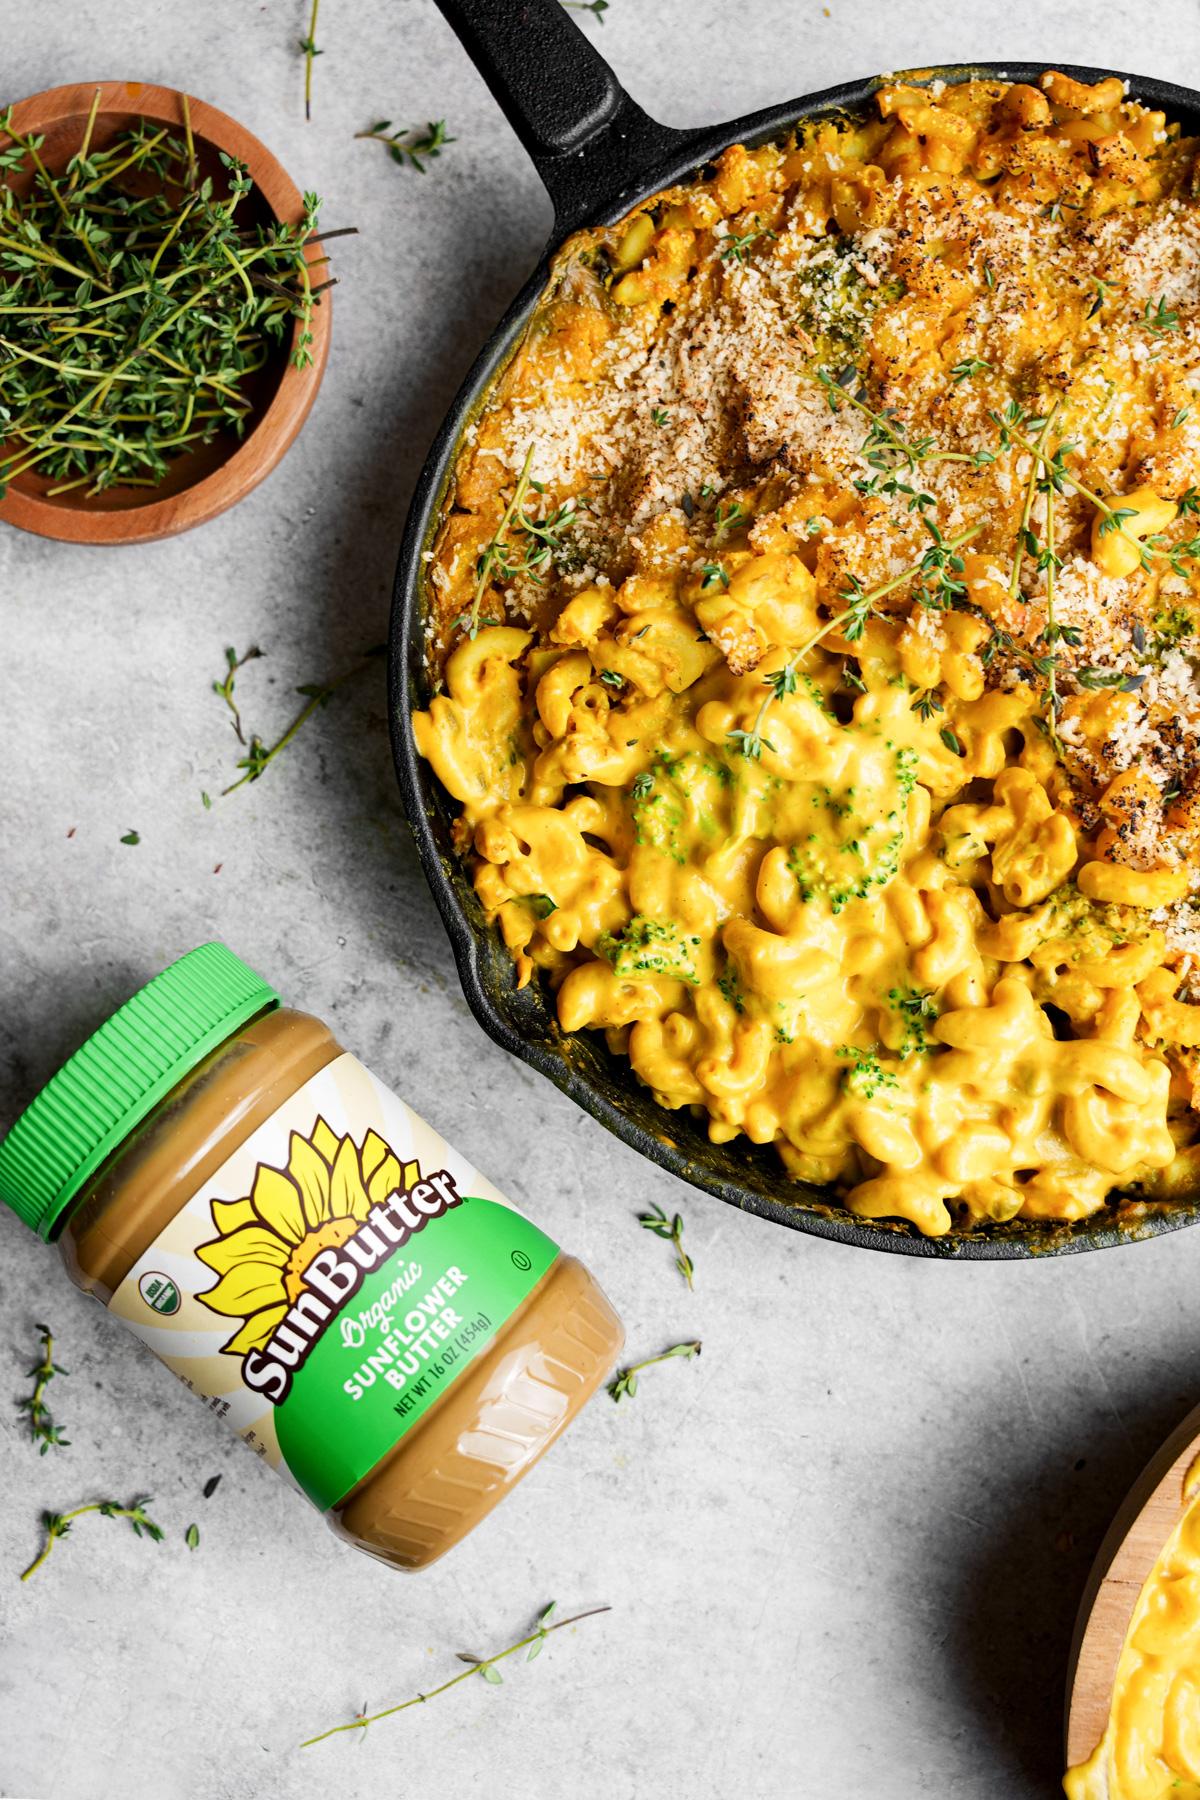 the nut free vegan mac and cheese with the sunflower butter